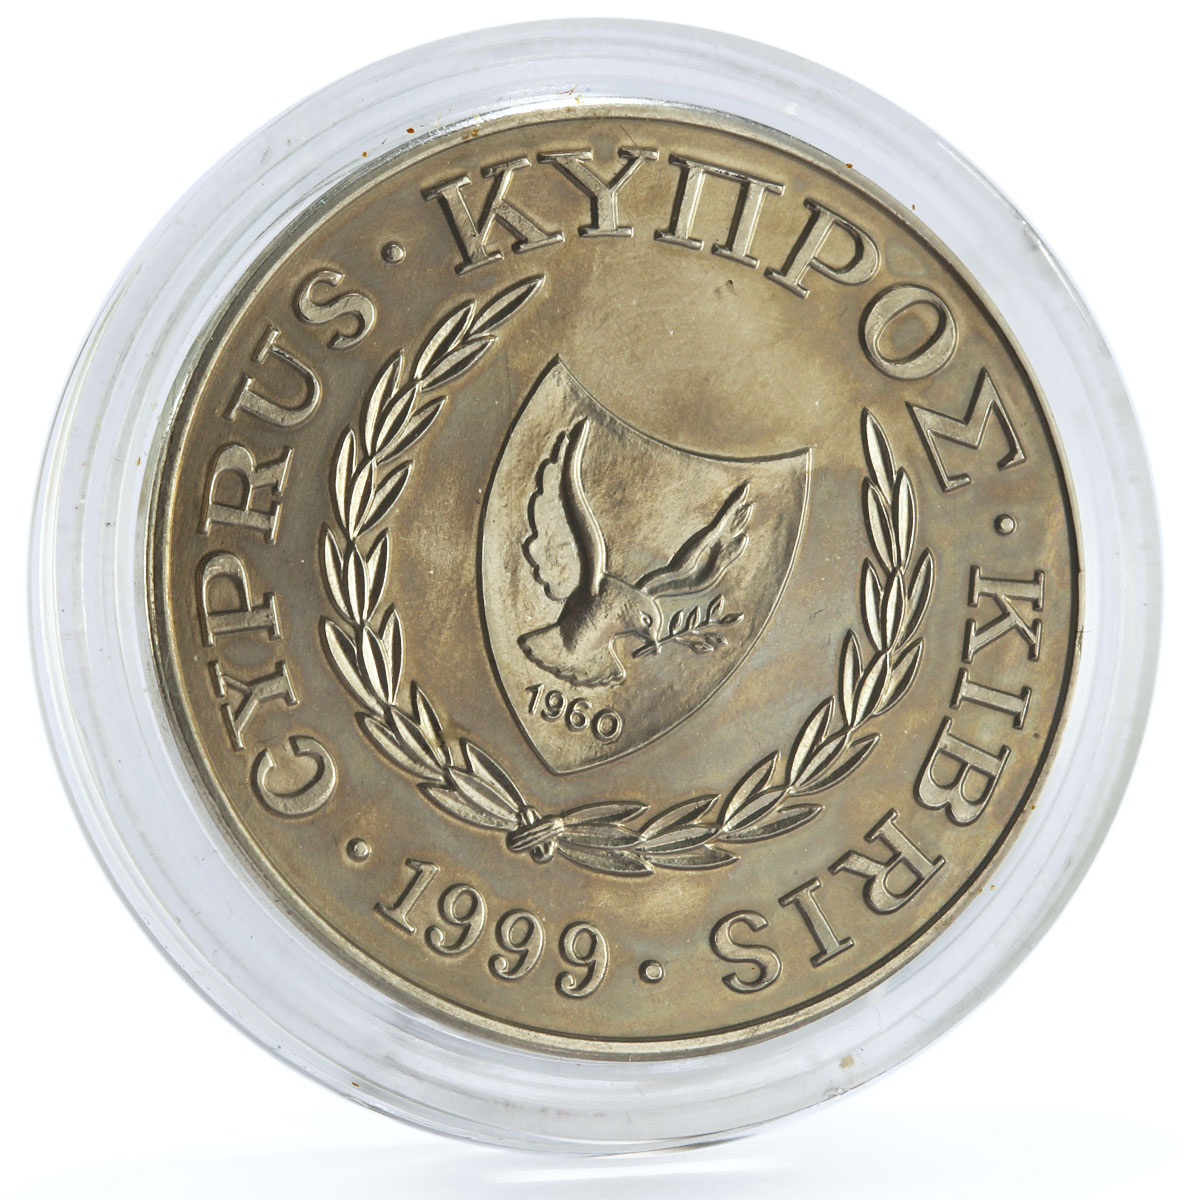 Cyprus 1 pound The Red Book Flora Cyprus Orchid Flower CuNi coin 1999